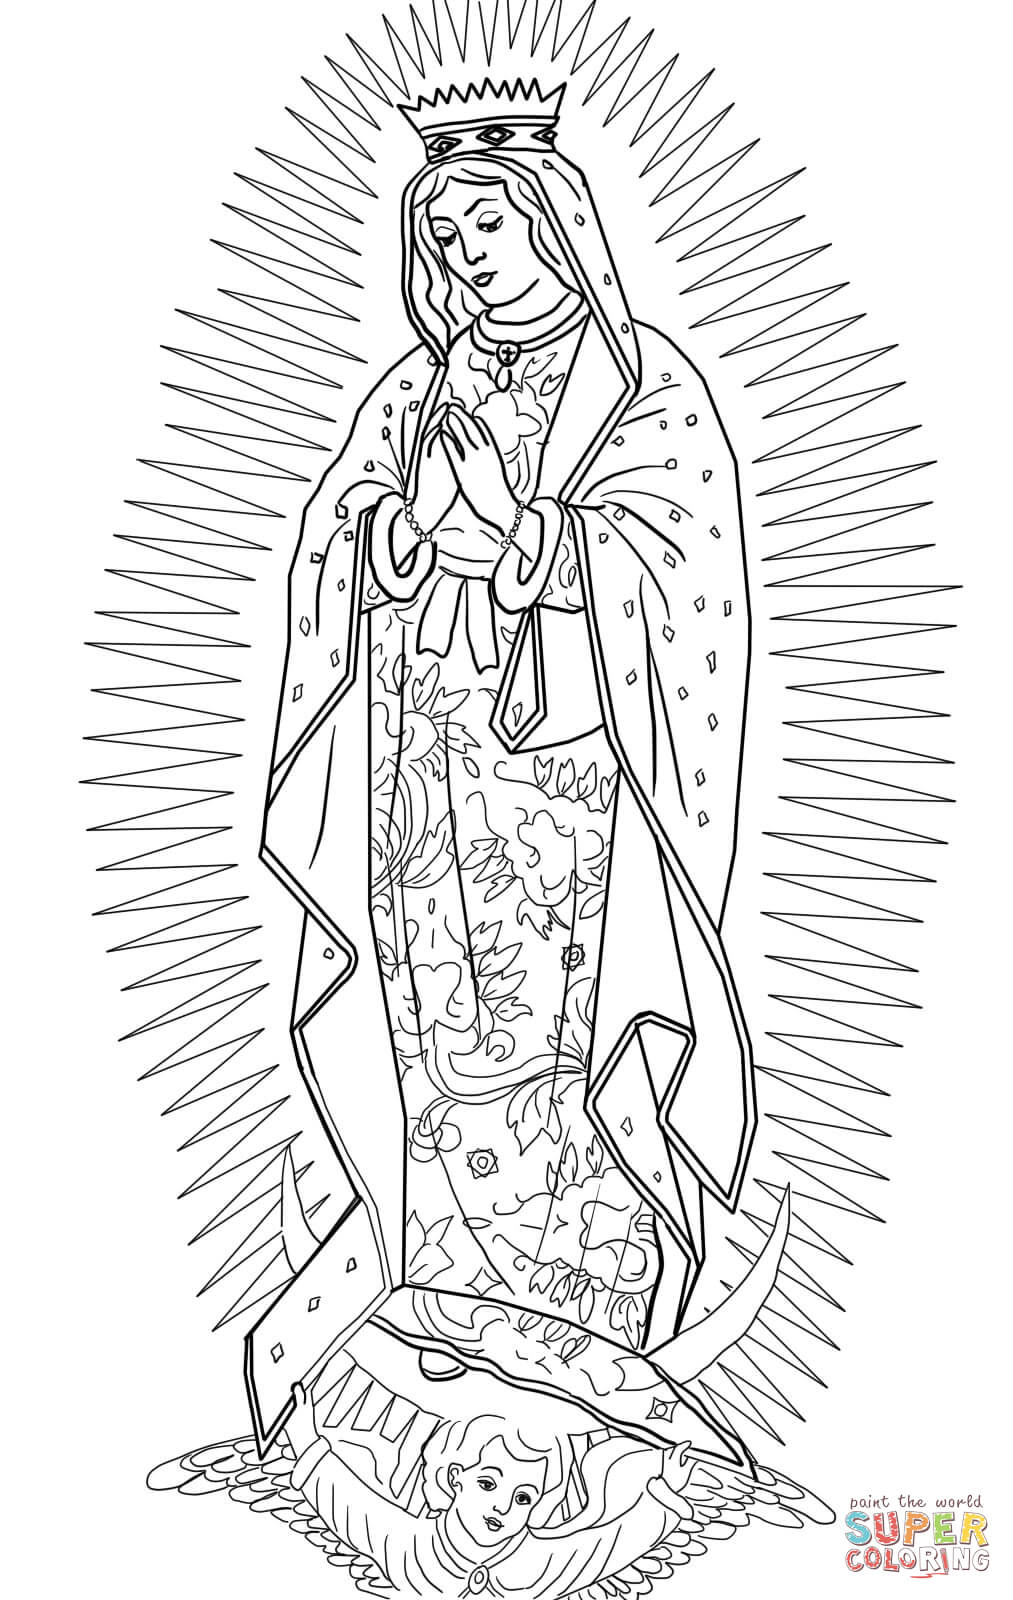 Our Lady of Guadalupe coloring page | Free Printable Coloring Pages